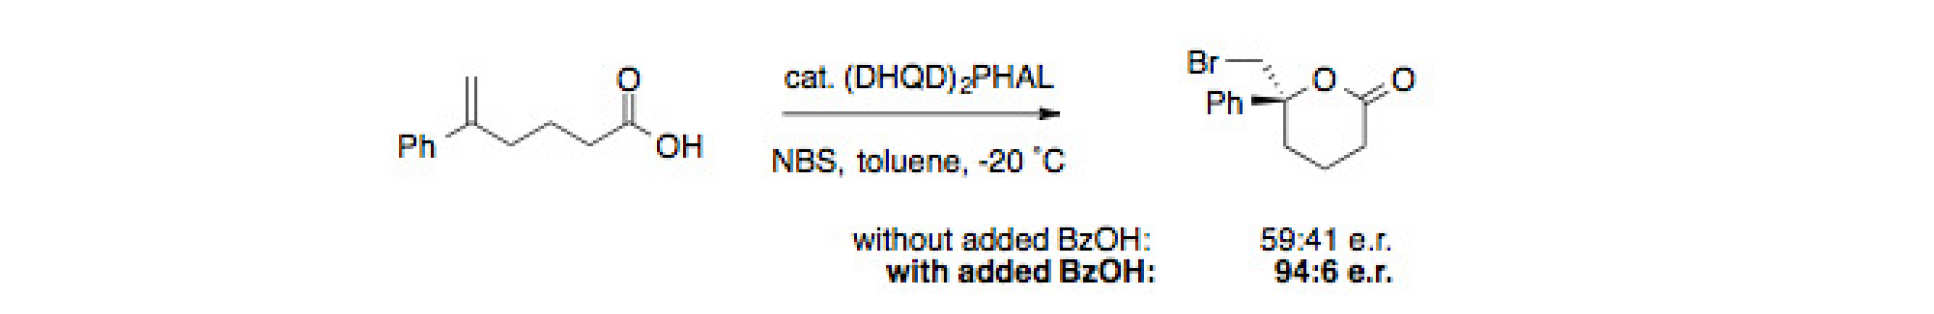 Summary scheme for paper: Catalytic asymmetric bromolactonisation reactions using (DHQD)2PHAL-benzoic acid combinations